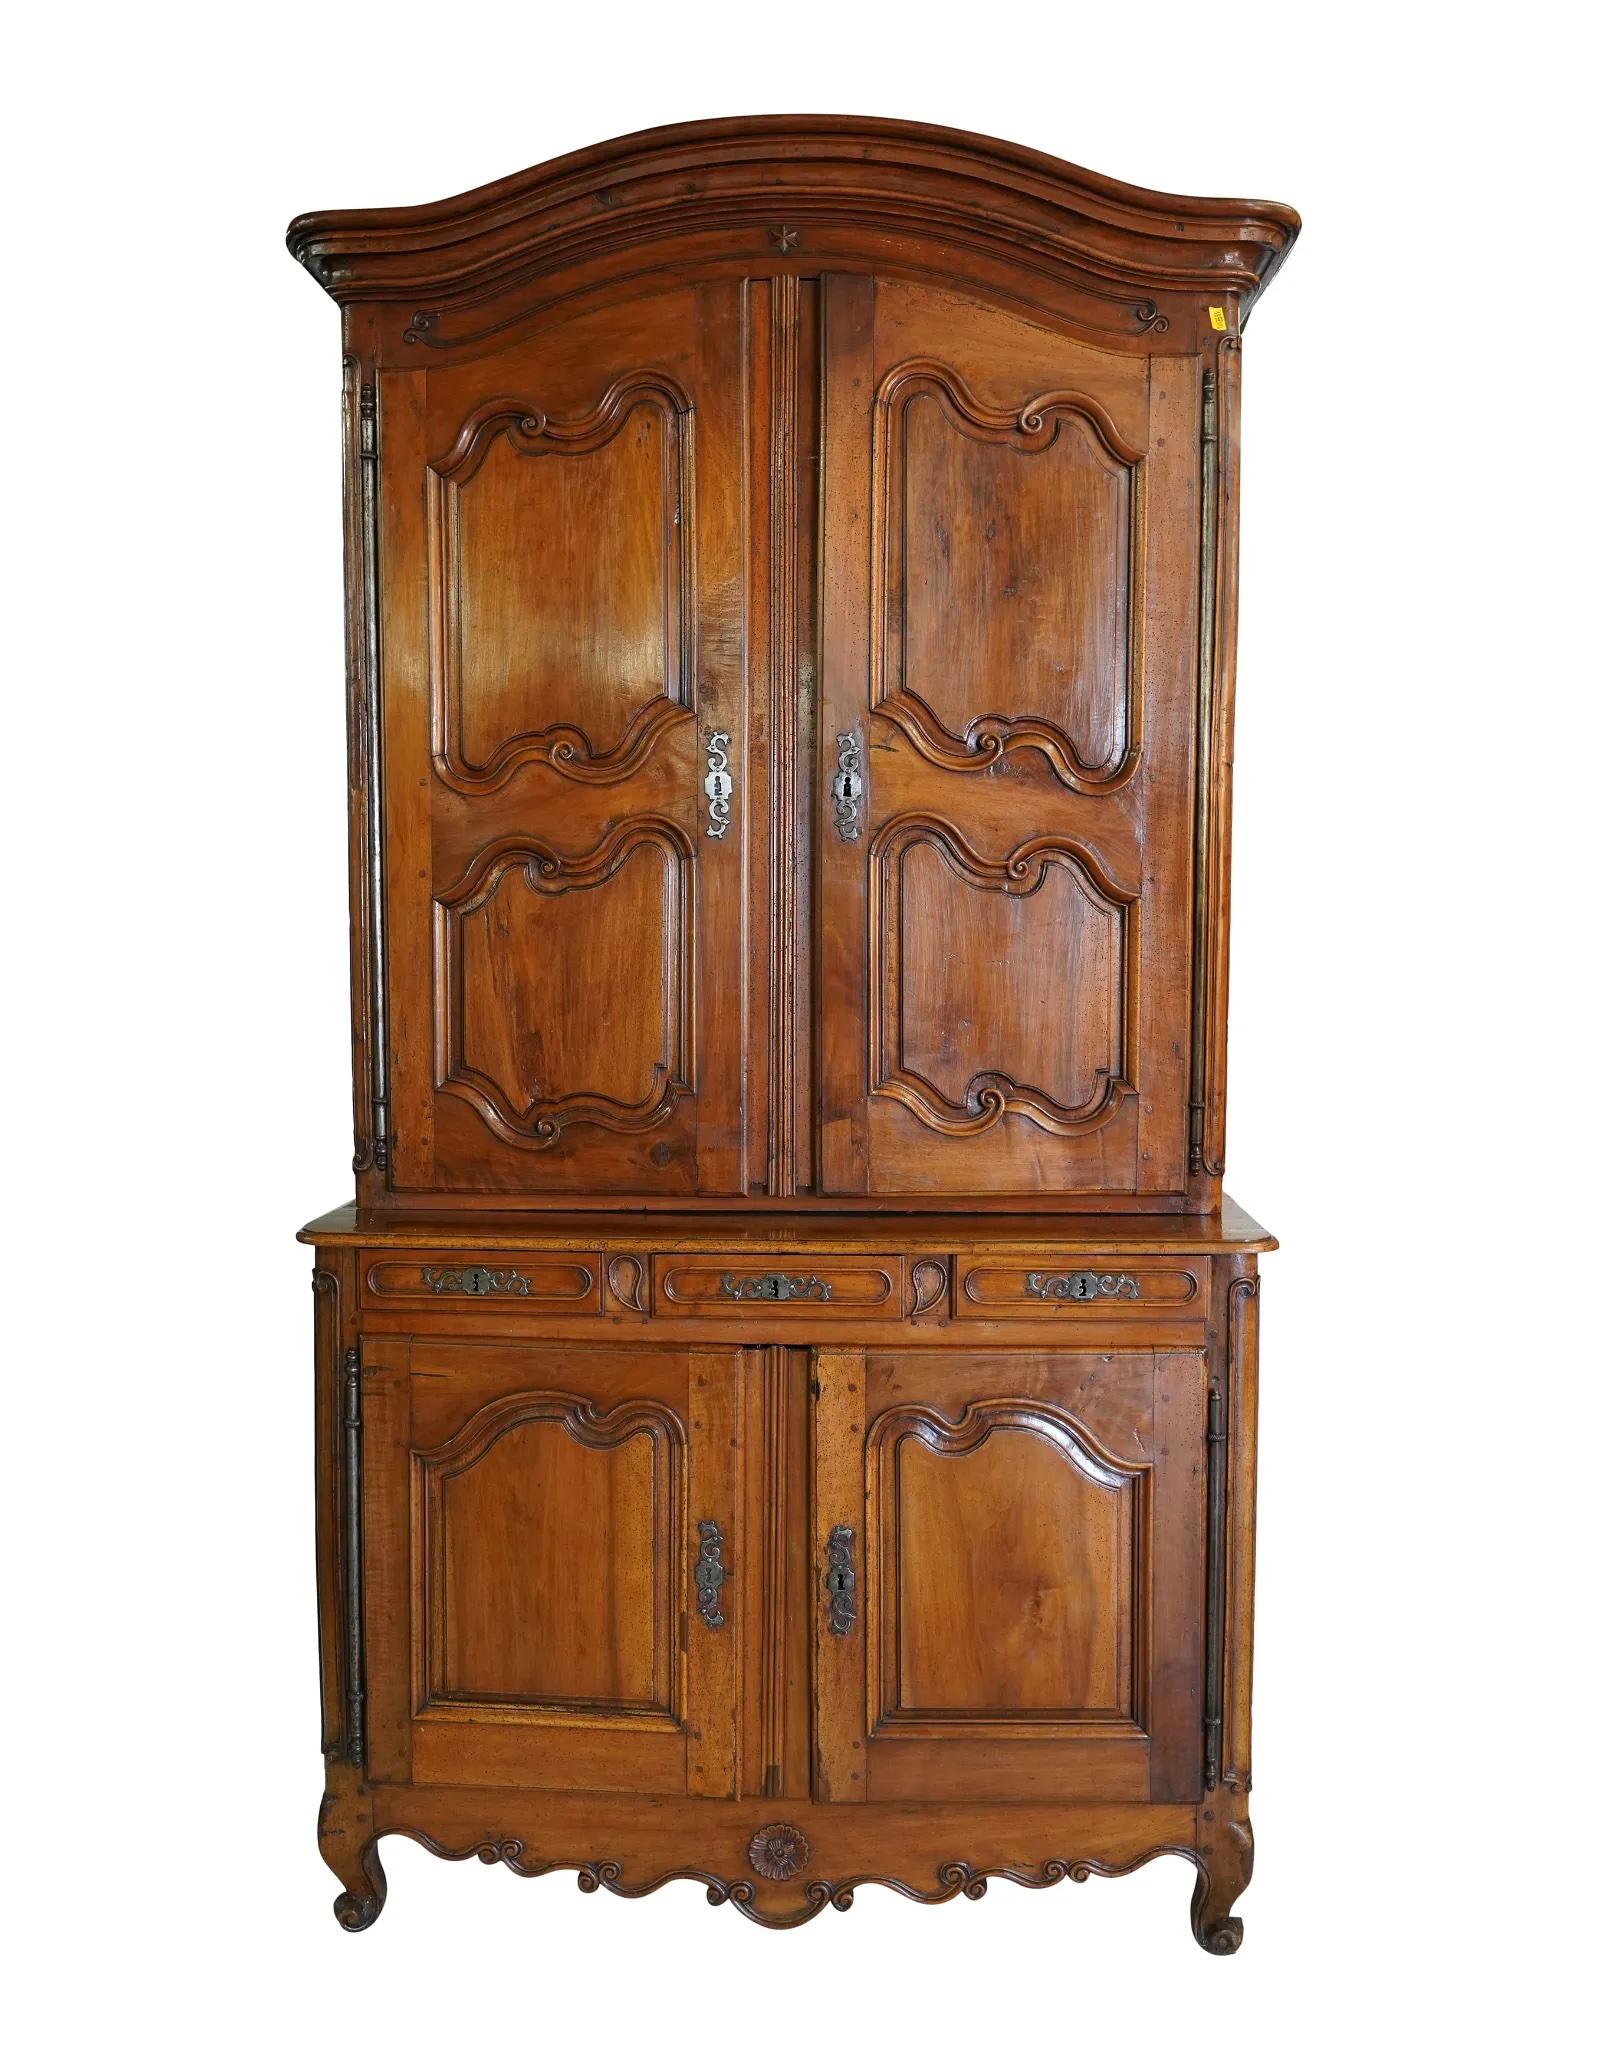 Monumental late 18th Century Louis XV Provincial Walnut Buffet a Deux Corps in two sections. The upper section with two carved paneled doors opening to a compartment with two shelves. The lower section with 3 drawers over a two door cabinet opening